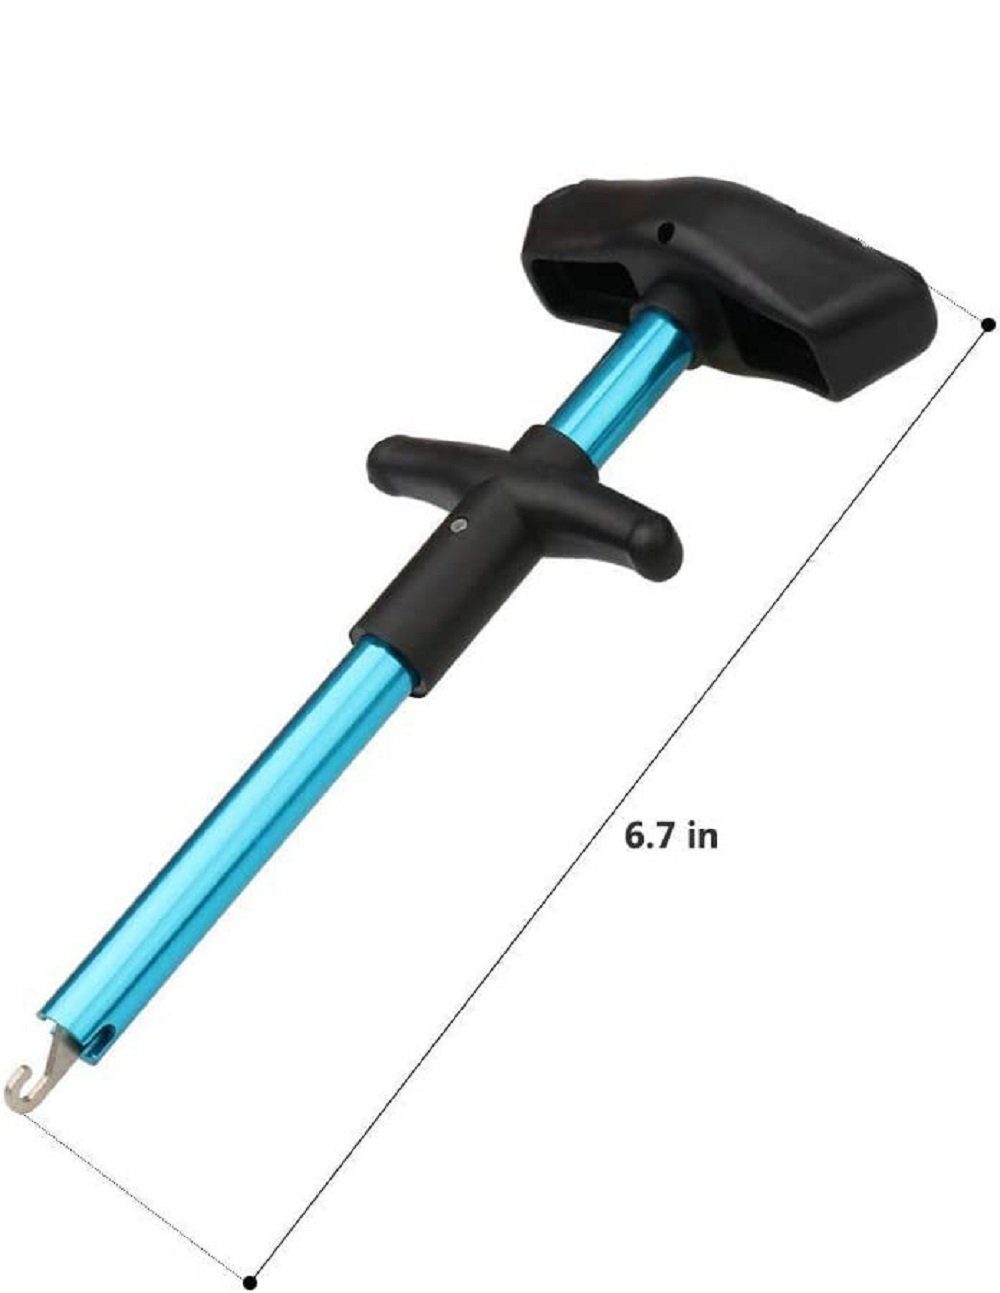 Tool Remover nuodwell Hook Easy Fischgreifer NUODWELL Fish